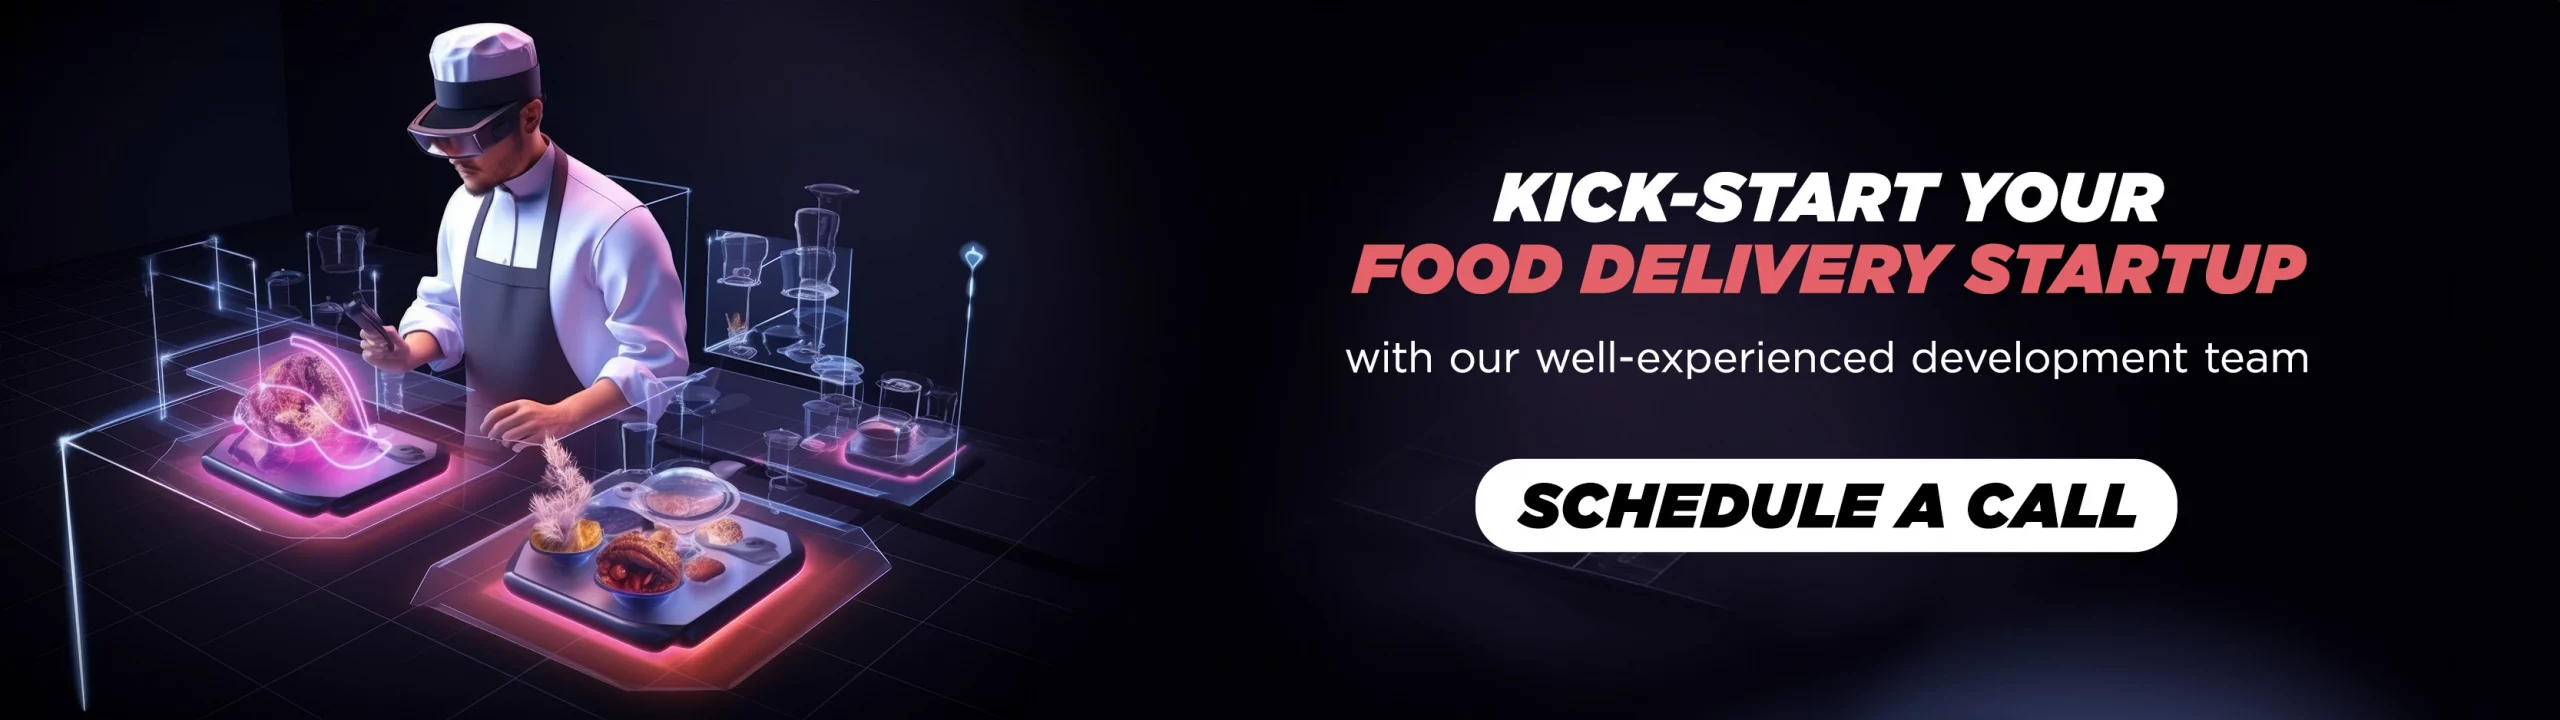 Kick-start your food delivery startup